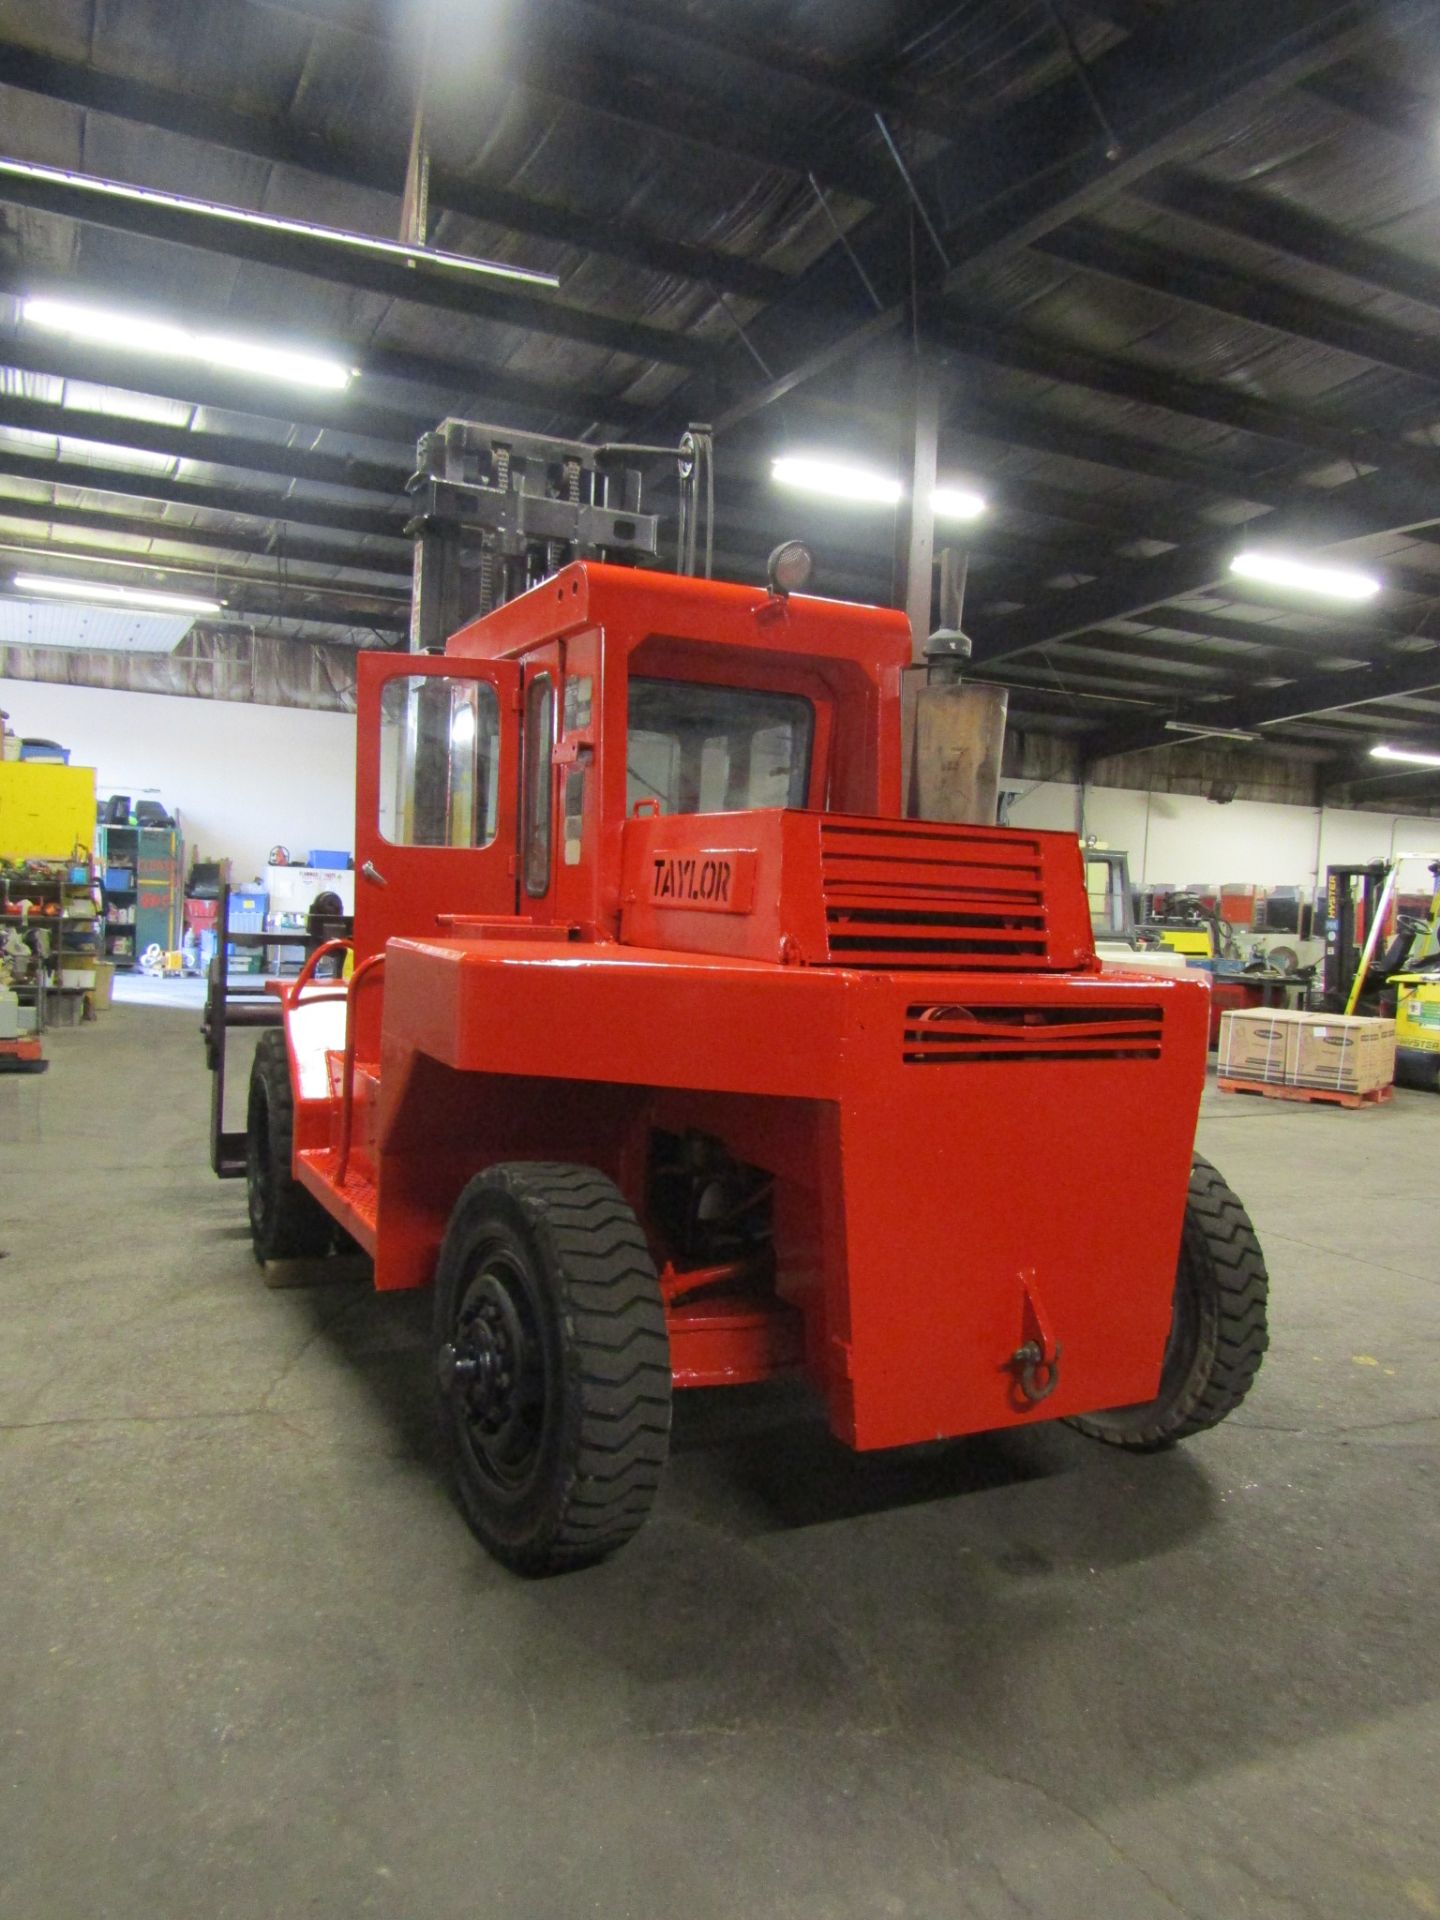 Taylor 18000lbs Capacity OUTDOOR Forklift - foam filled tires with 8 FOOT FORKS, Diesel powered with - Image 2 of 3